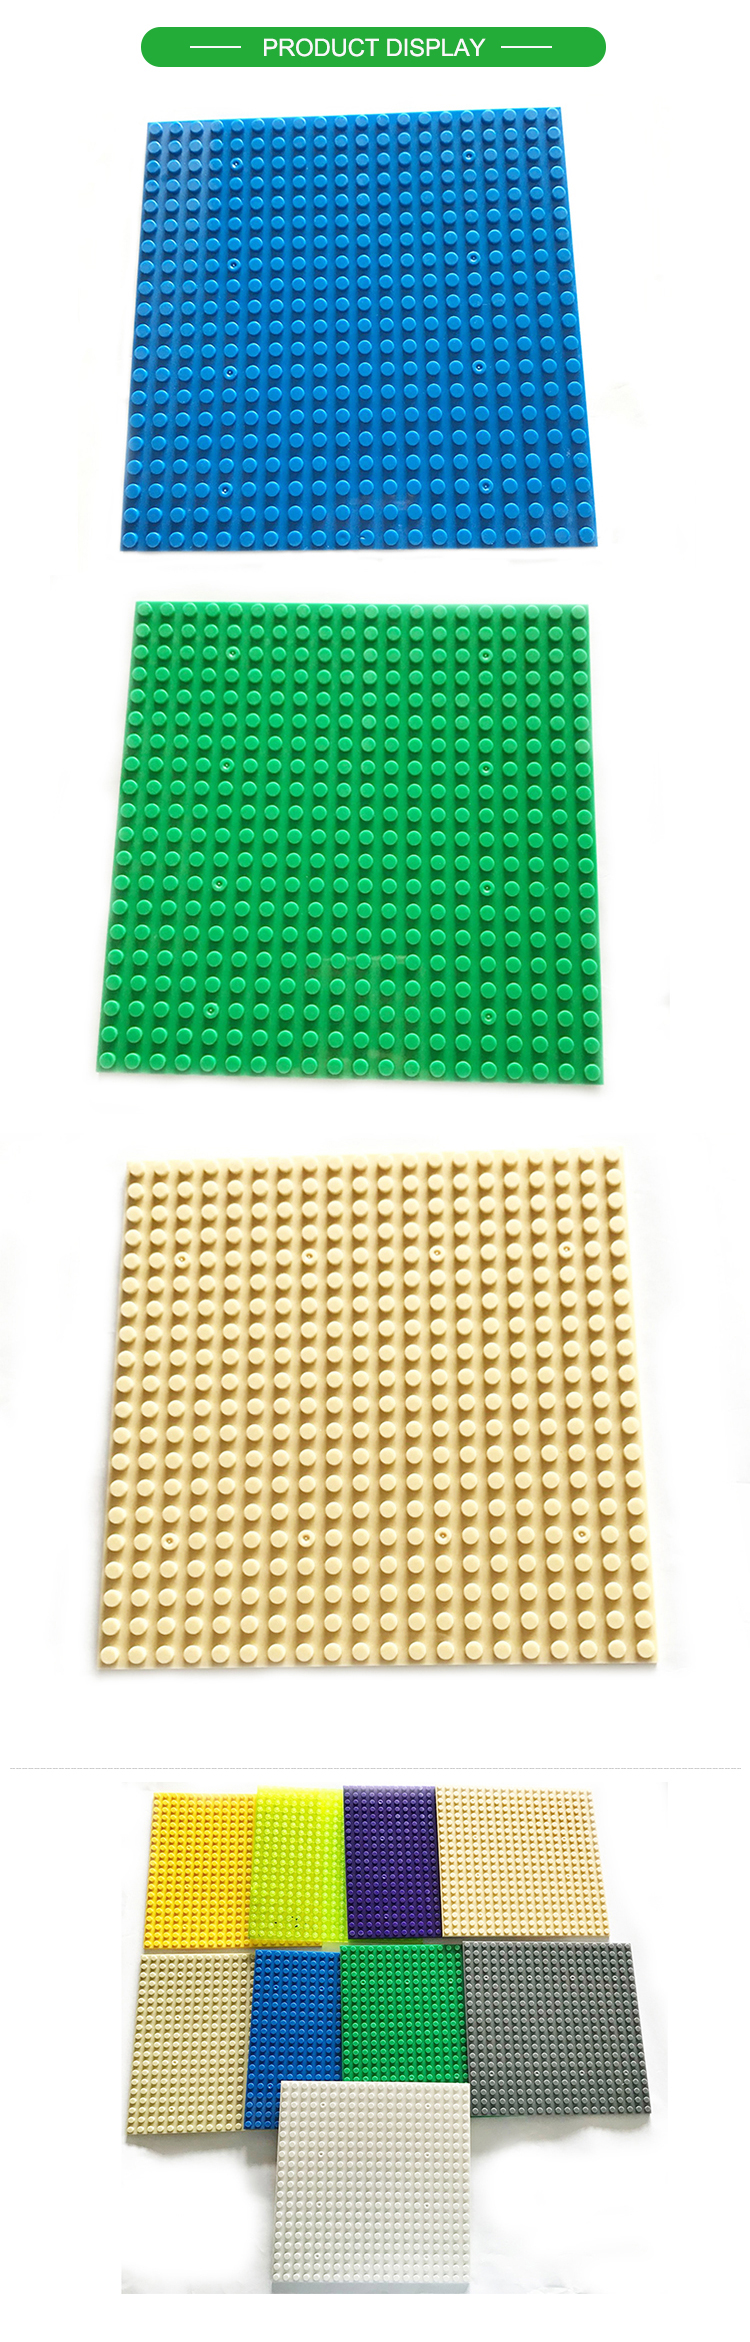 WOMA TOYS baseplate 20x20 Dots Classic Brick Base Plates Small Bricks DIY Building Blocks Educational Toys for Children